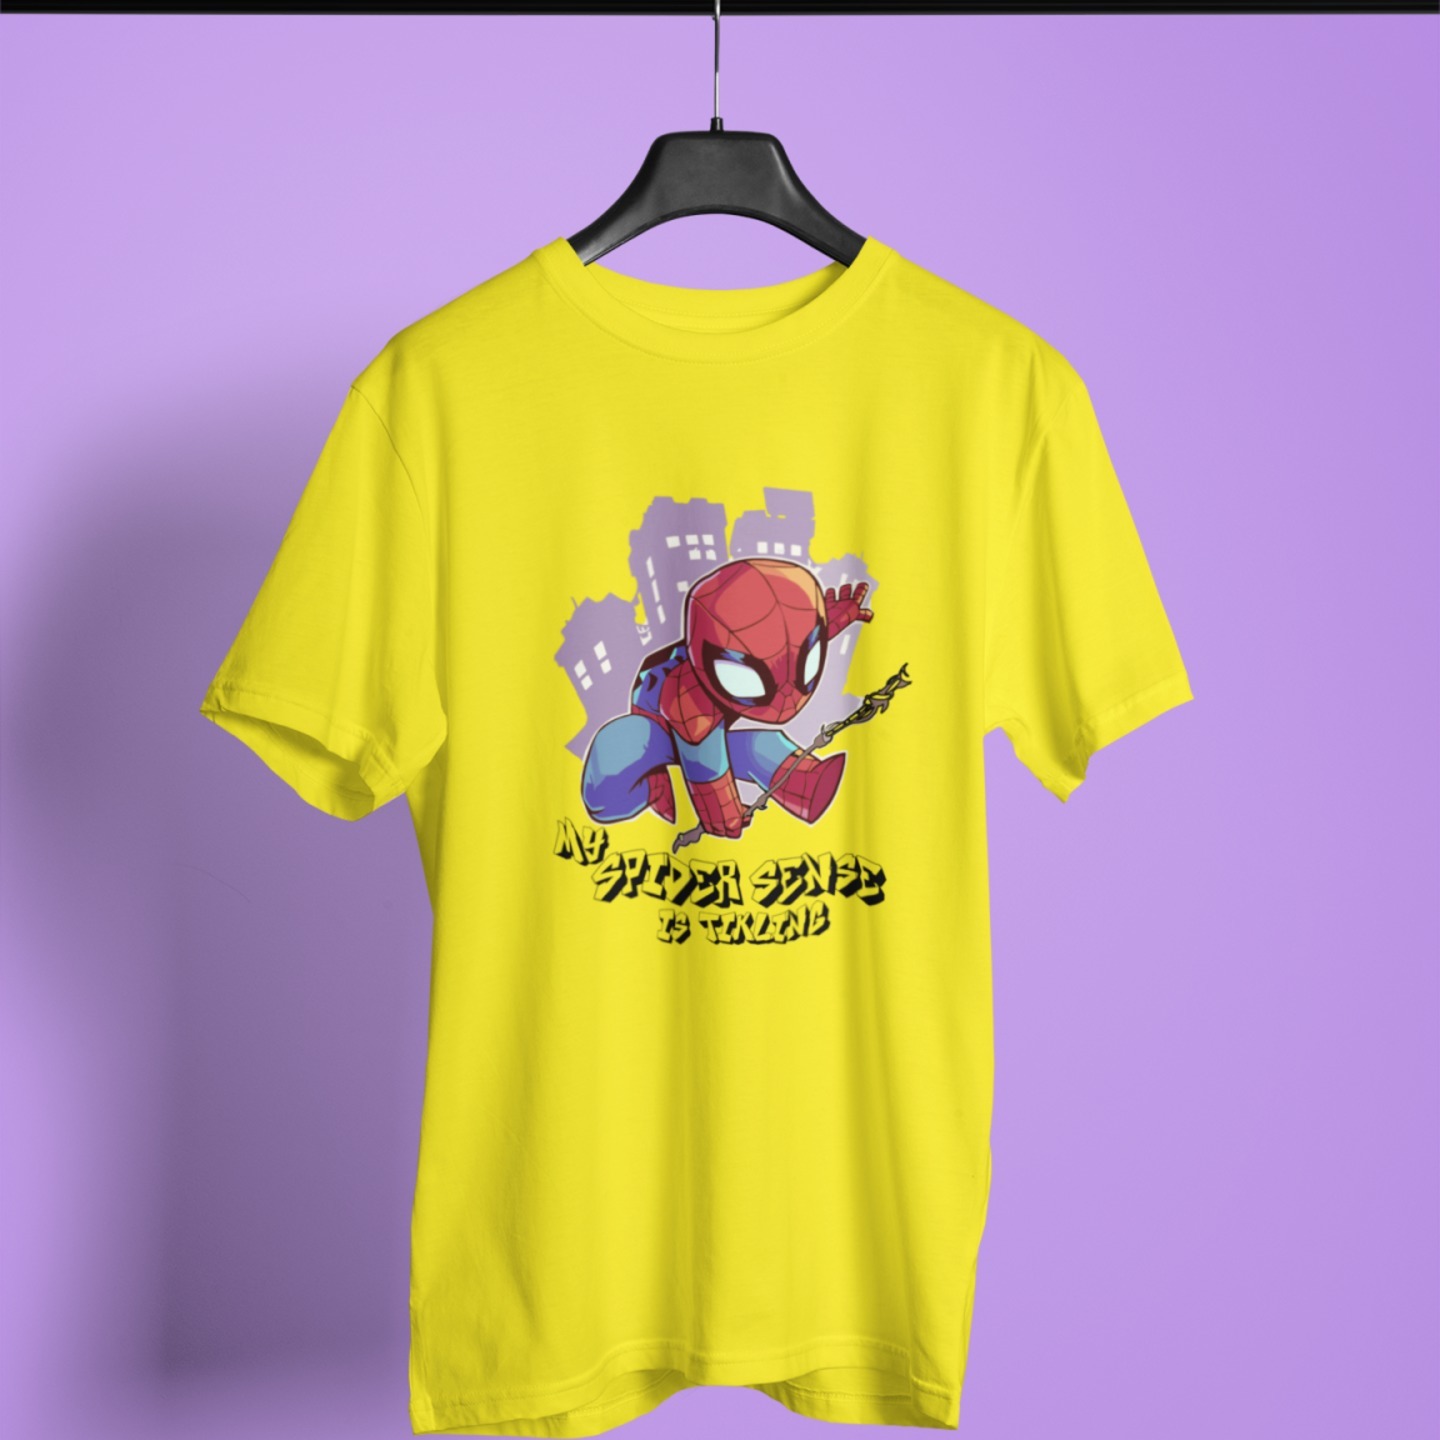 My Spider Sense Is Tikling T-Shirt for Boys